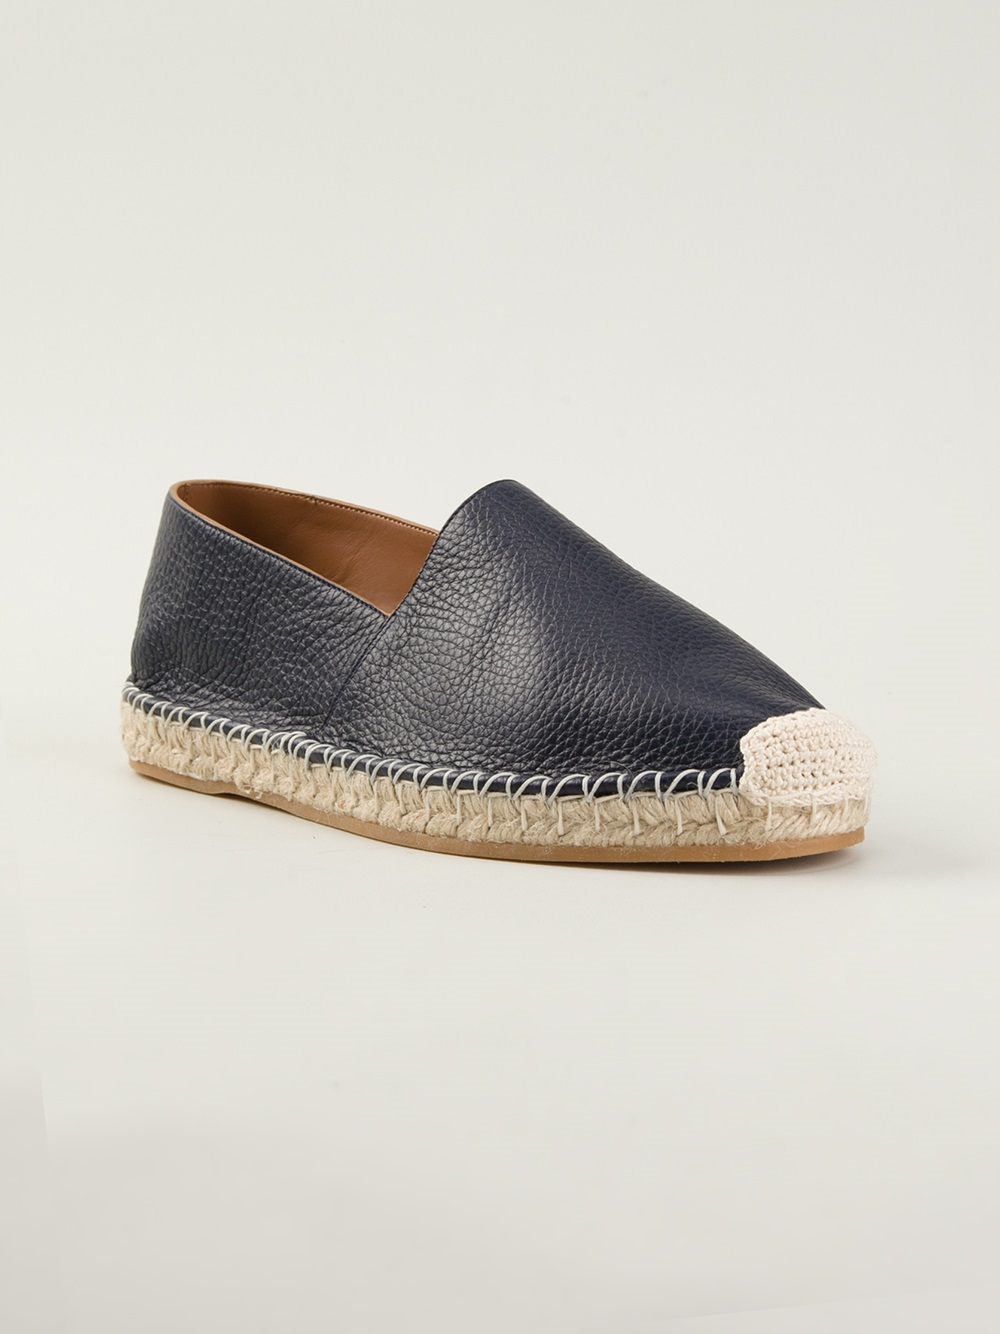 Lyst - Valentino Leather Espadrille in Blue for Men